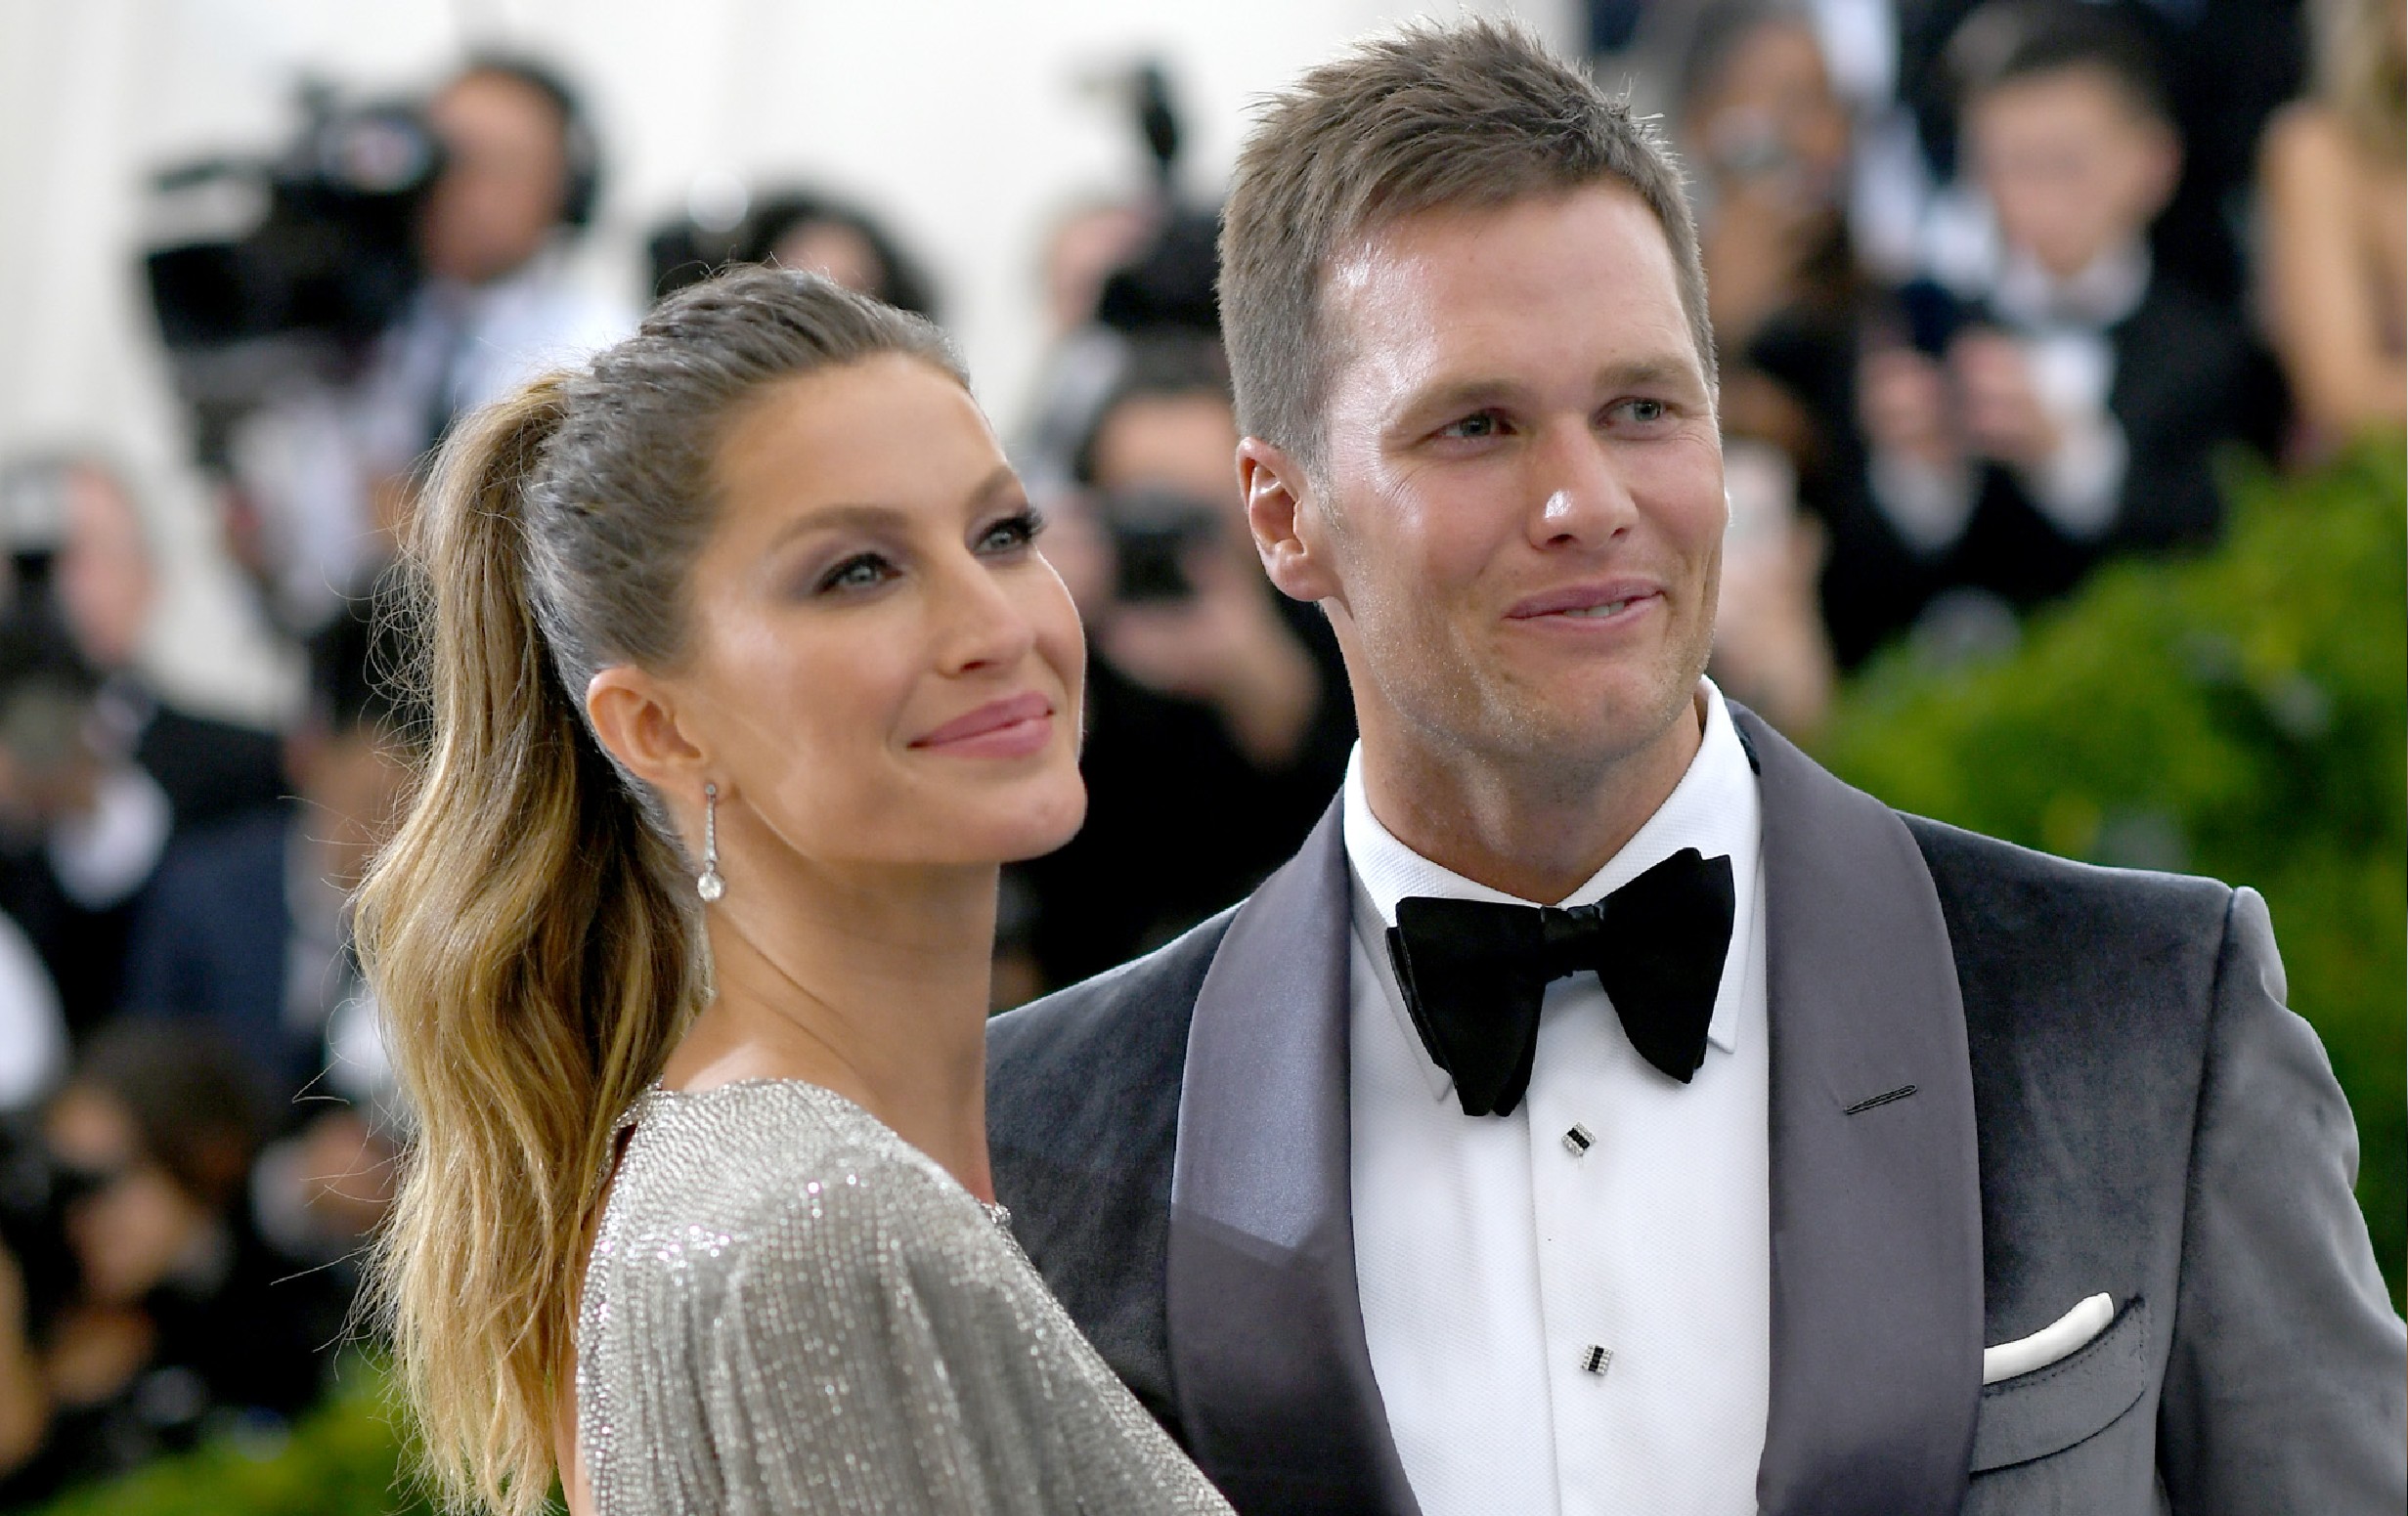 Gisele Bundchen Assigned Tom Brady A List Of ‘Relationship Rules’ After ‘Forcing’ Him To Retire From The NFL, Report Claims